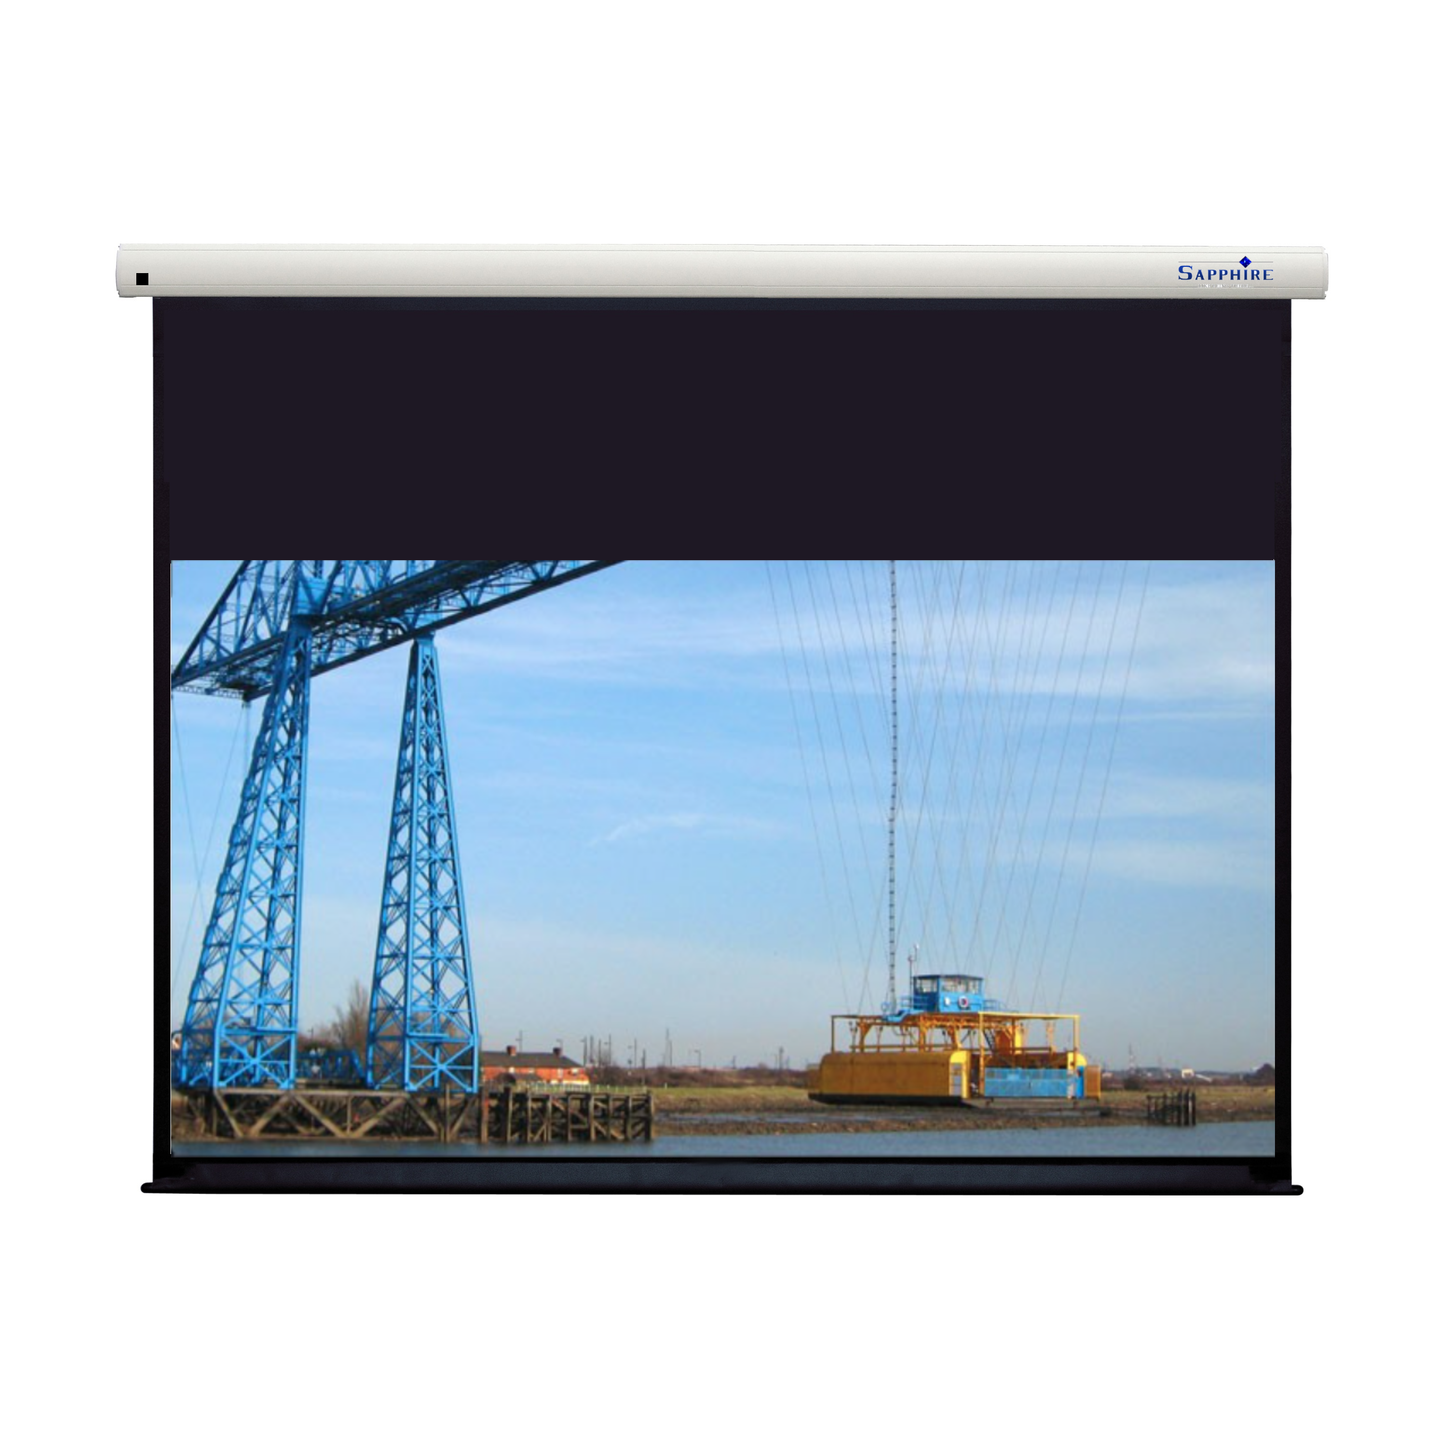 Sapphire Electric Screen with Trigger 16:10 Format Viewing Area 2701mm x 1687mm  Approx Case Dimensions L 2953mm x H 126mm x D 120mm